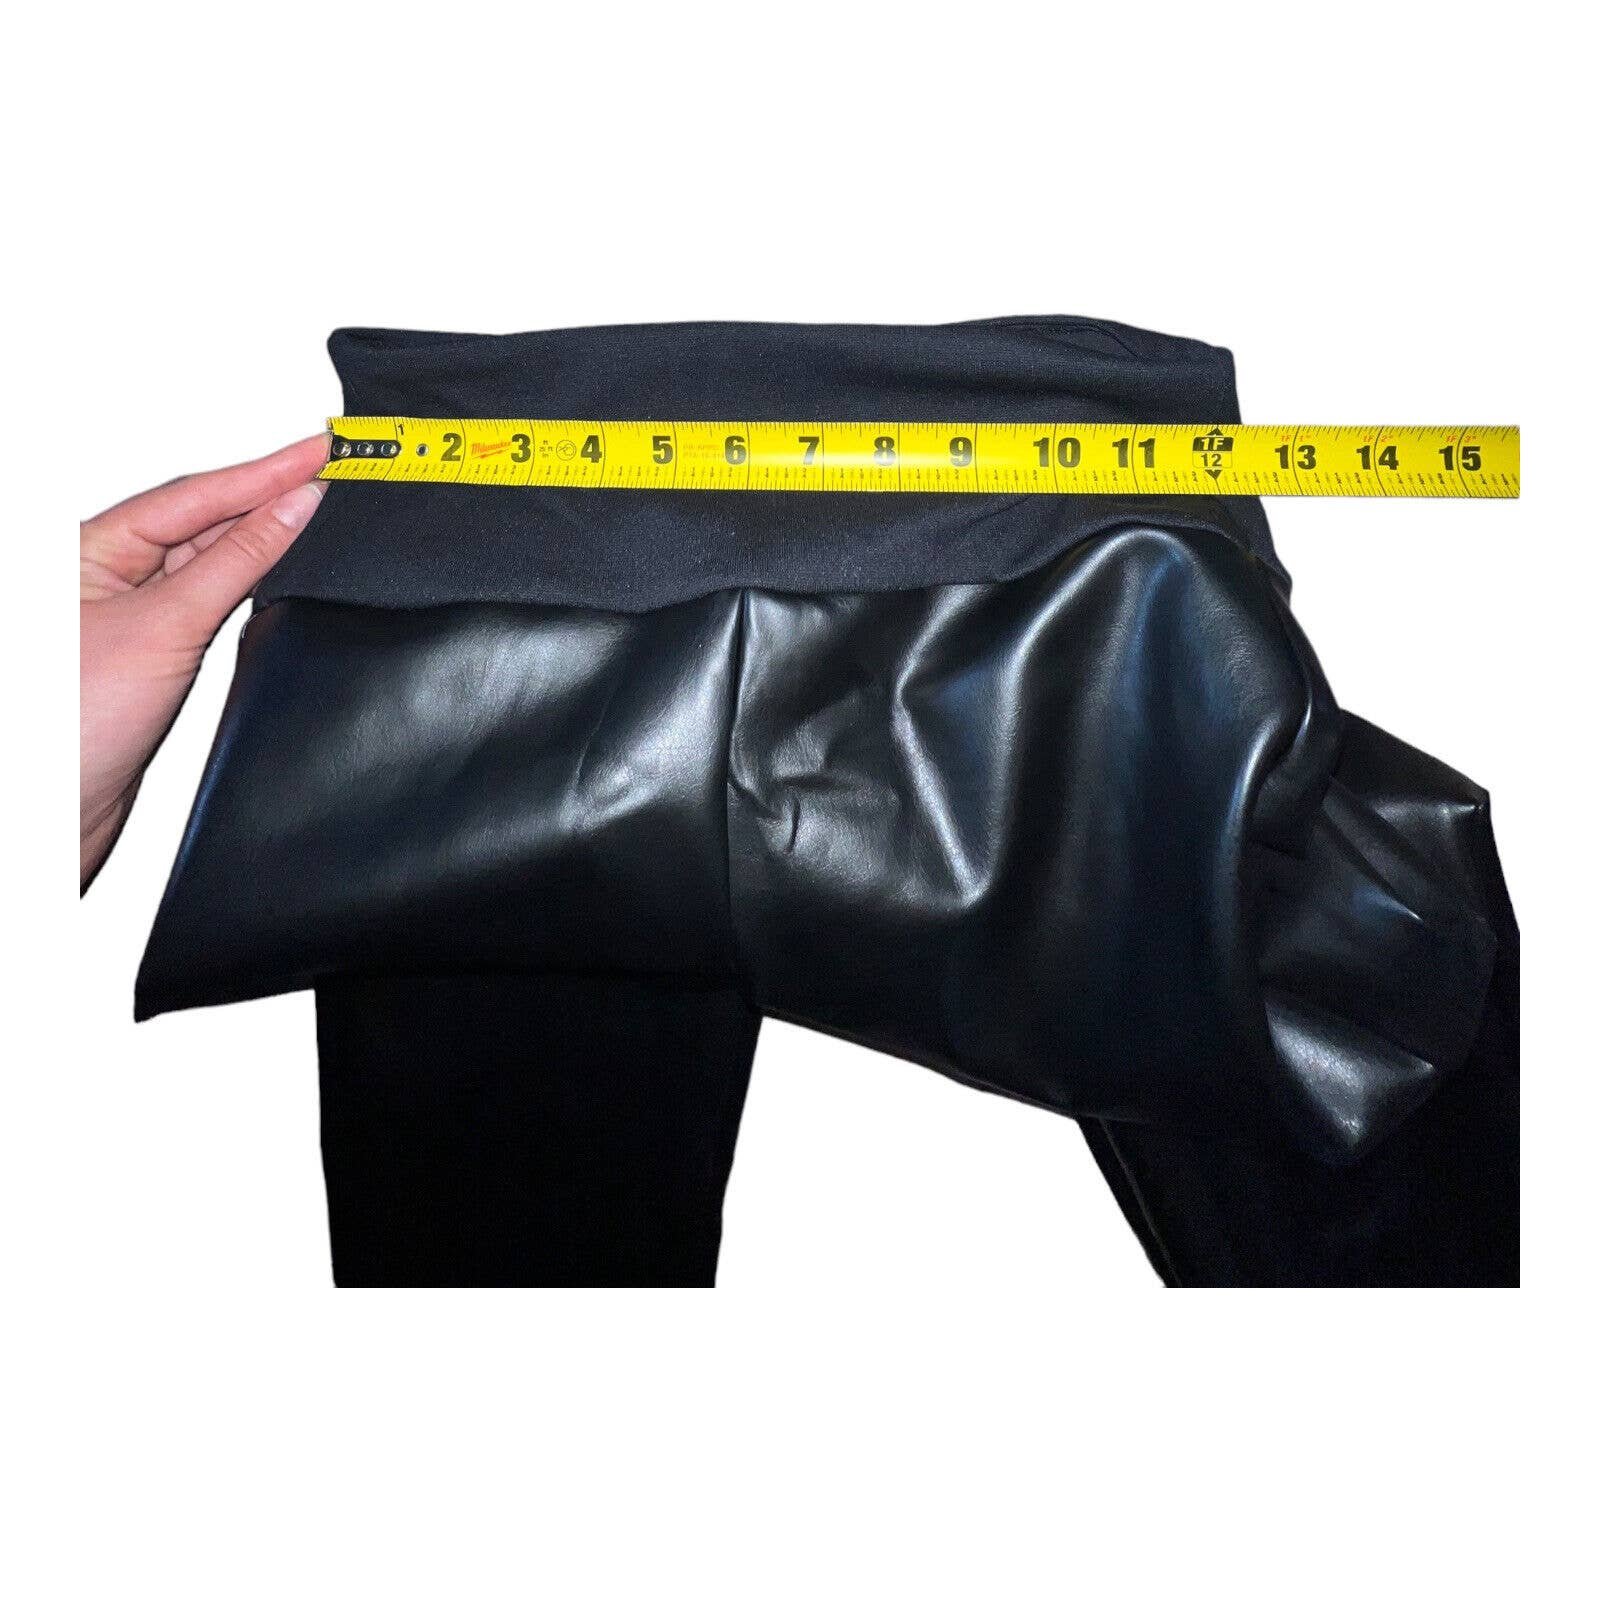 high discount SPANX Assets All Over Faux Leather Leggings 20258R Very Black Size small PMFjnSv5h well sale